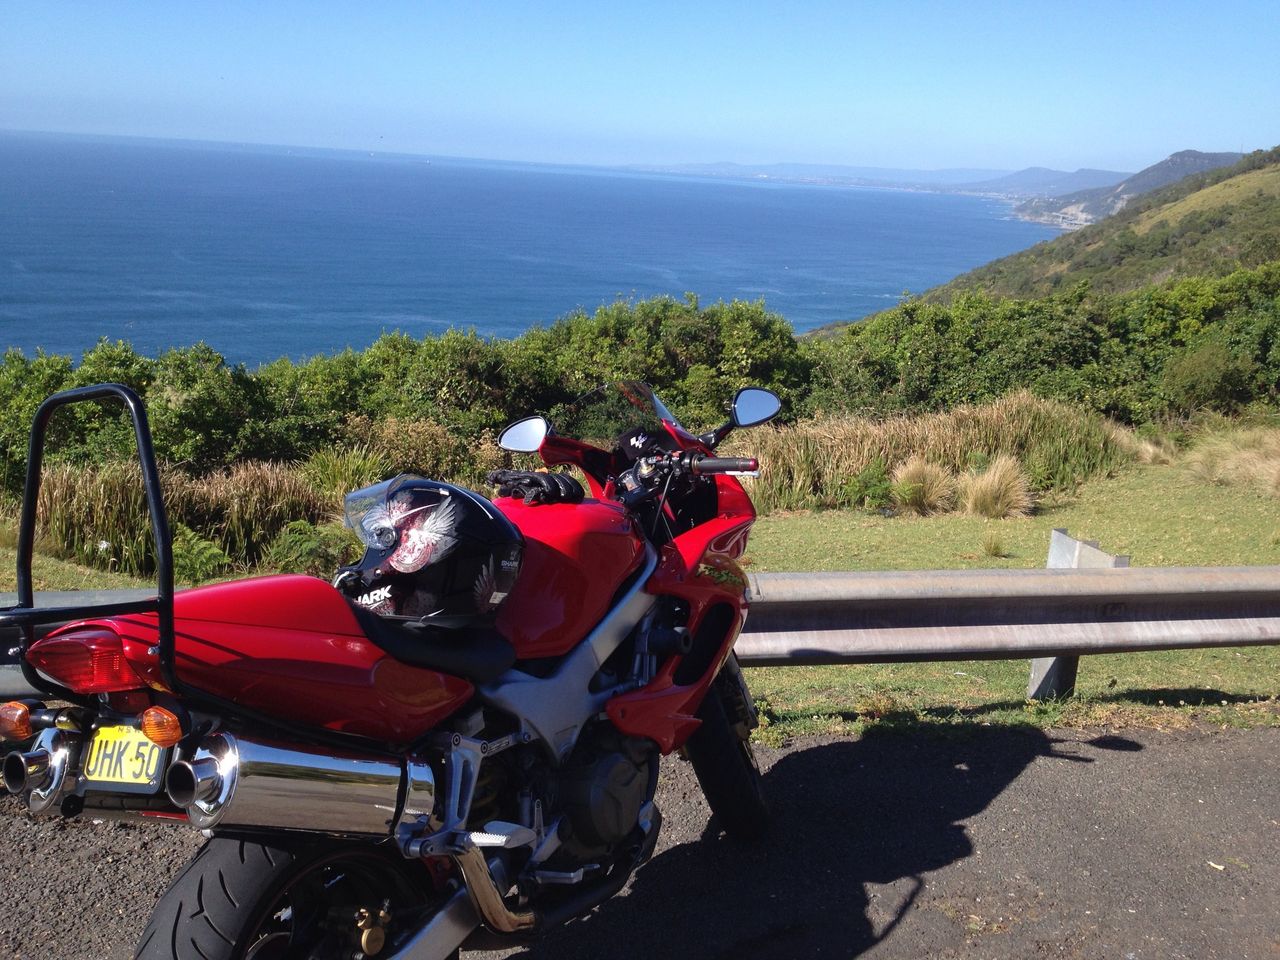 Stopped at Stanwell Park